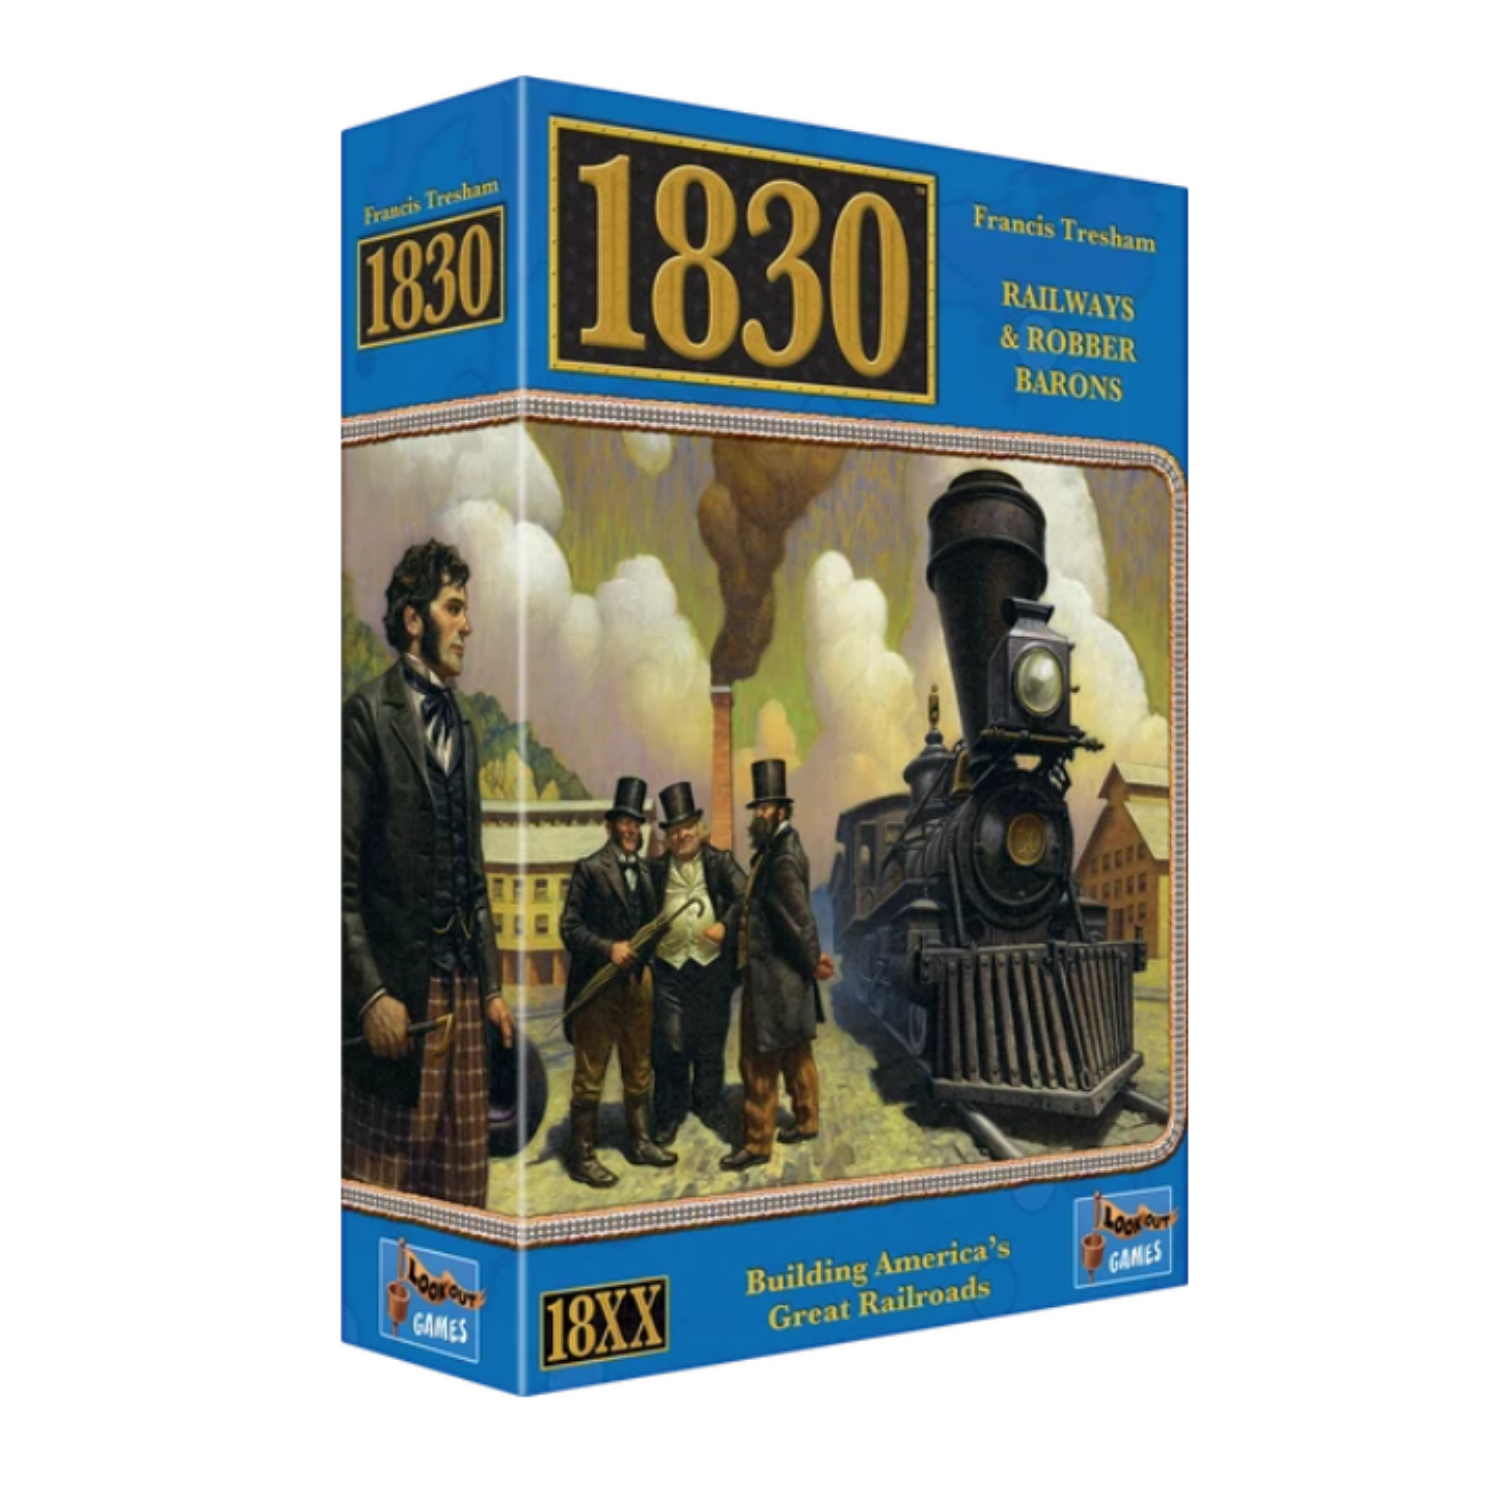 1830 (Revised Edition)